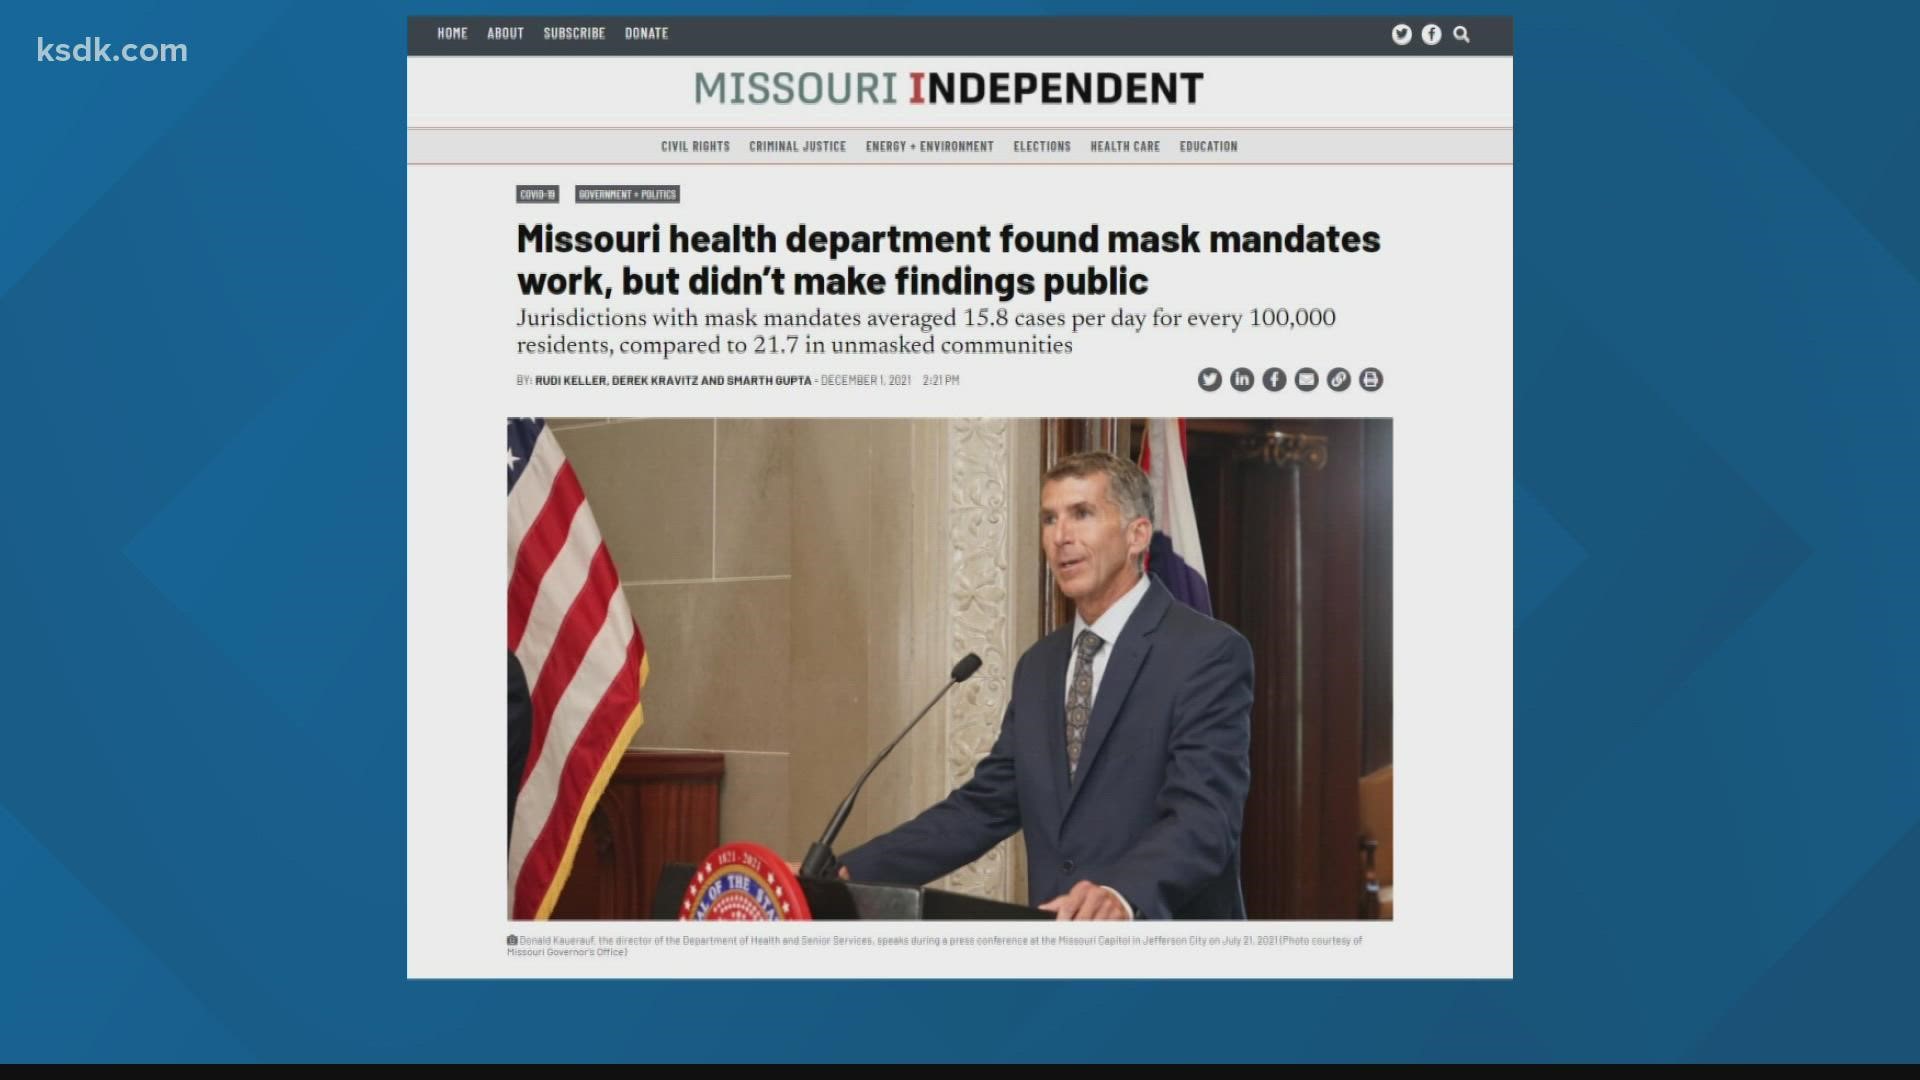 The Republican governor on Thursday ripped into a report on the findings from The Missouri Independent.